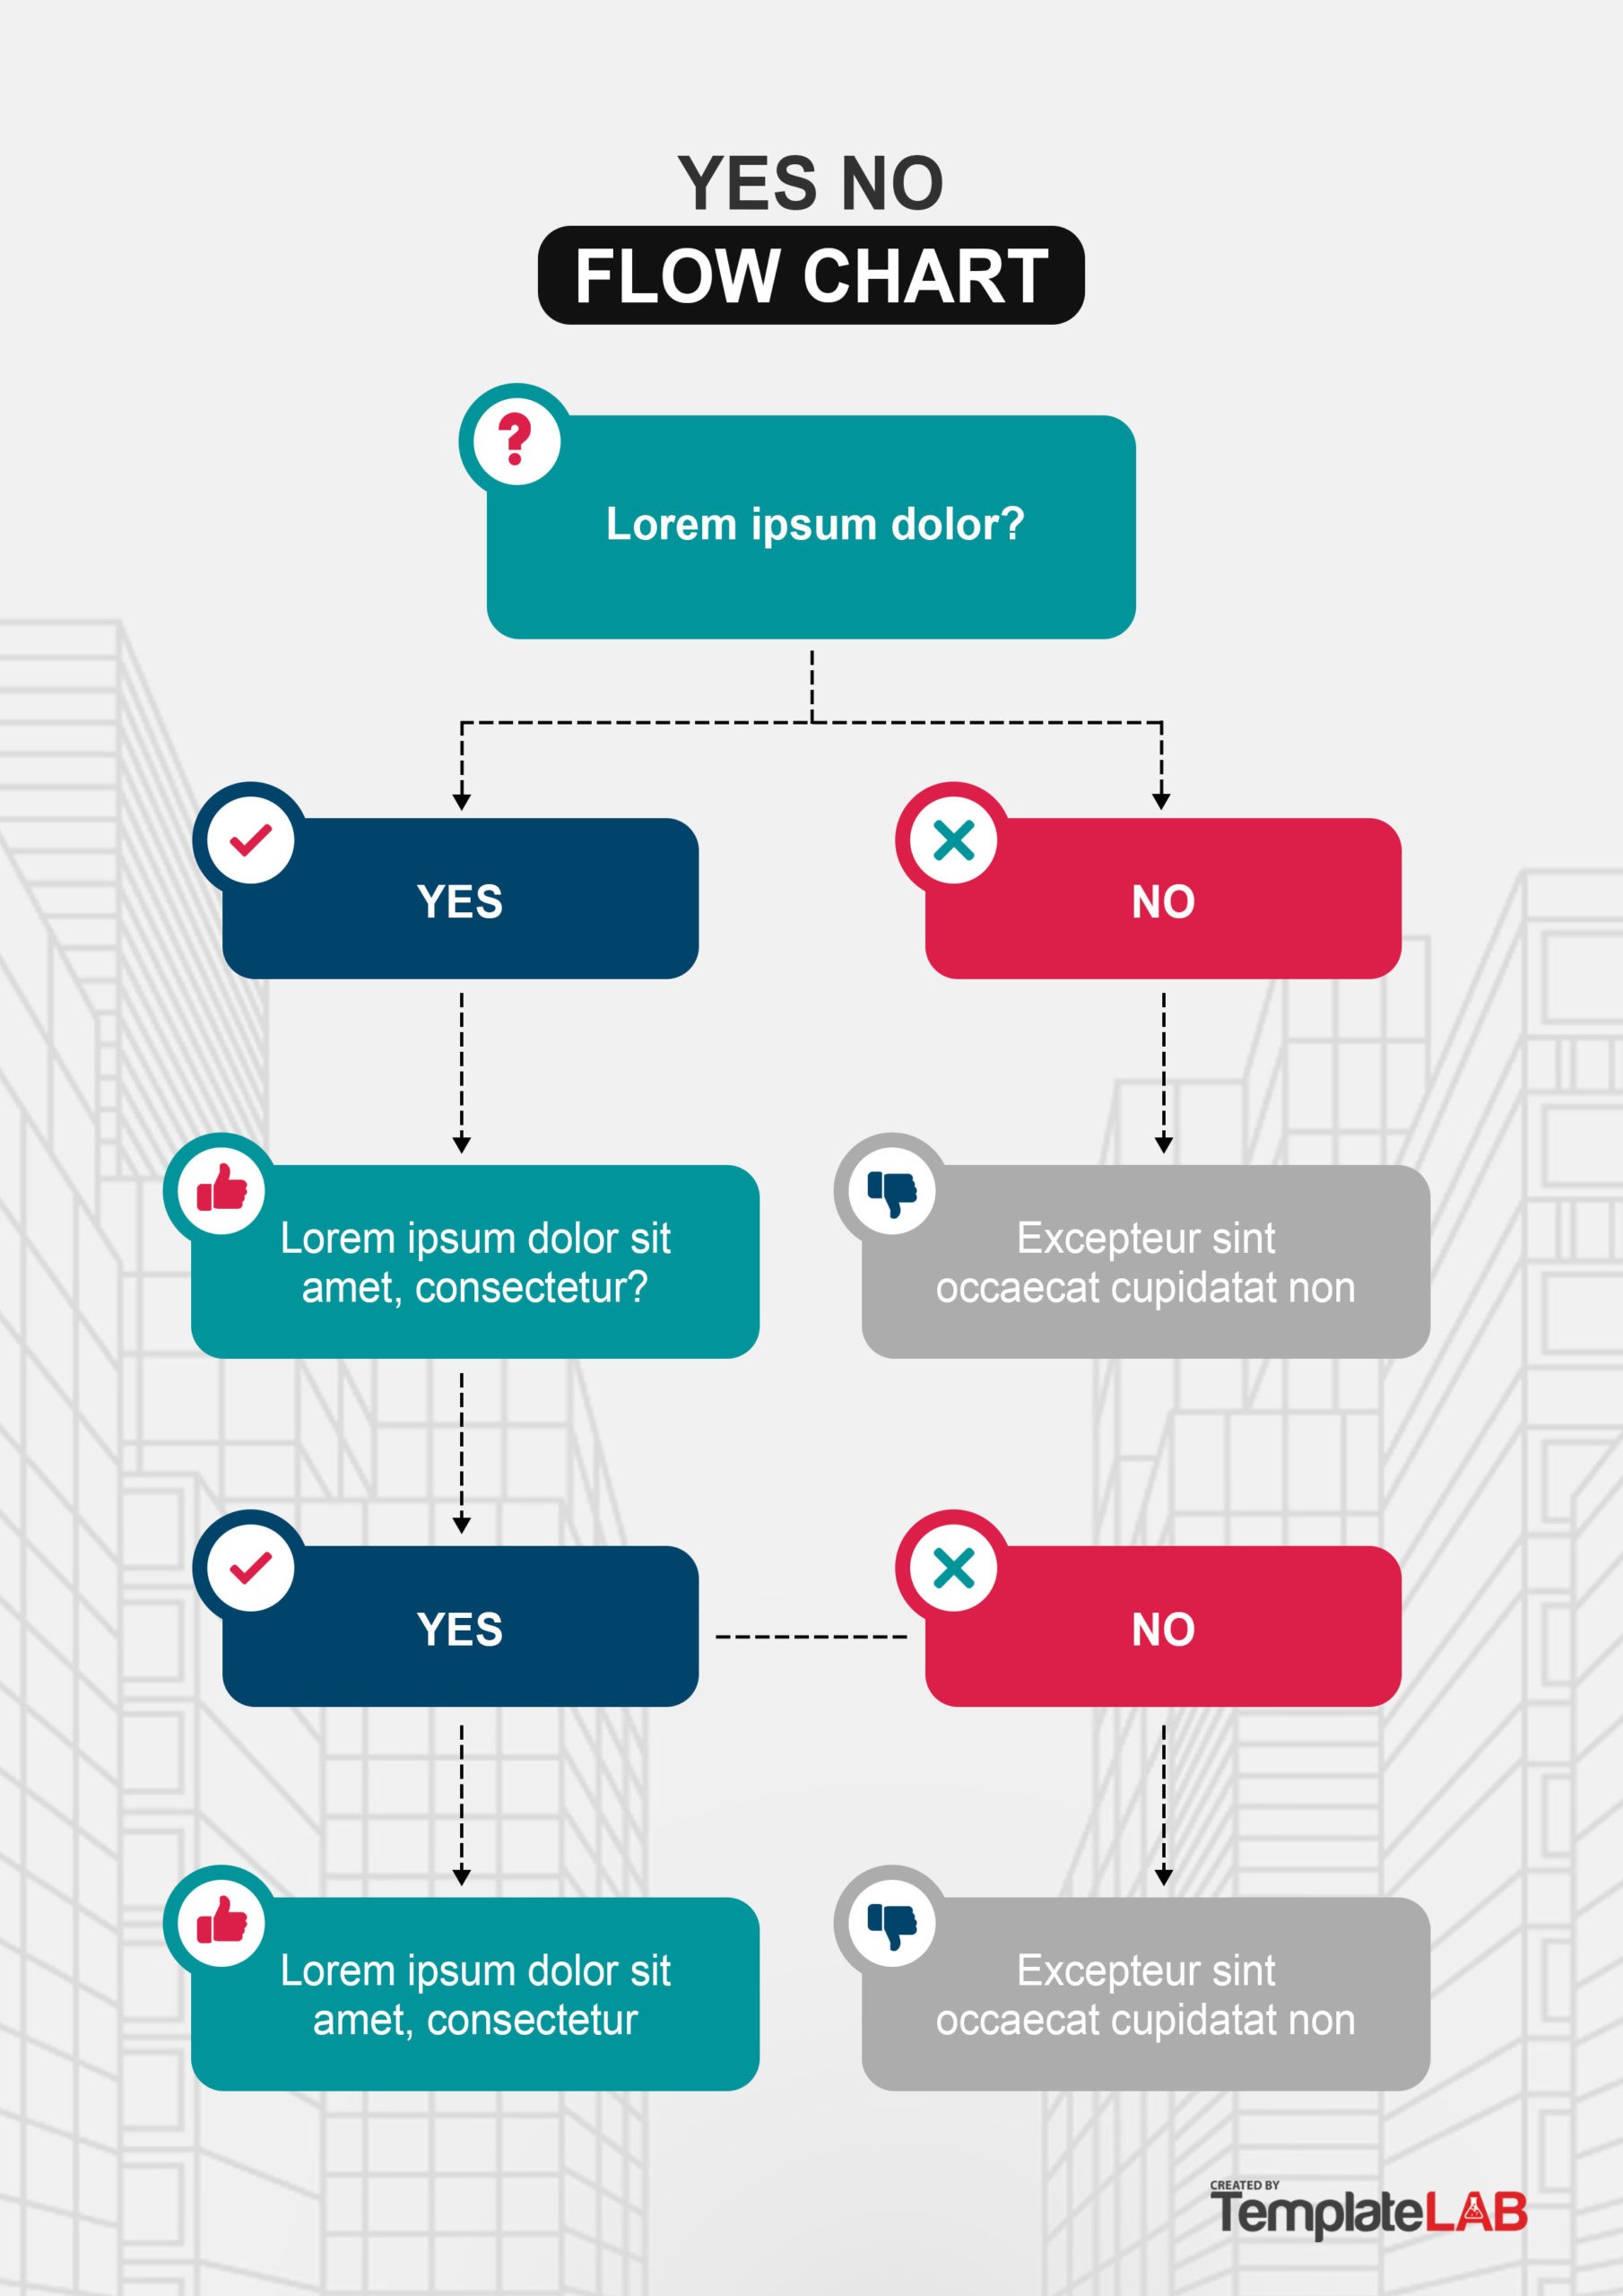 43 Fantastic Flow Chart Templates [Word, Excel, Power Point]